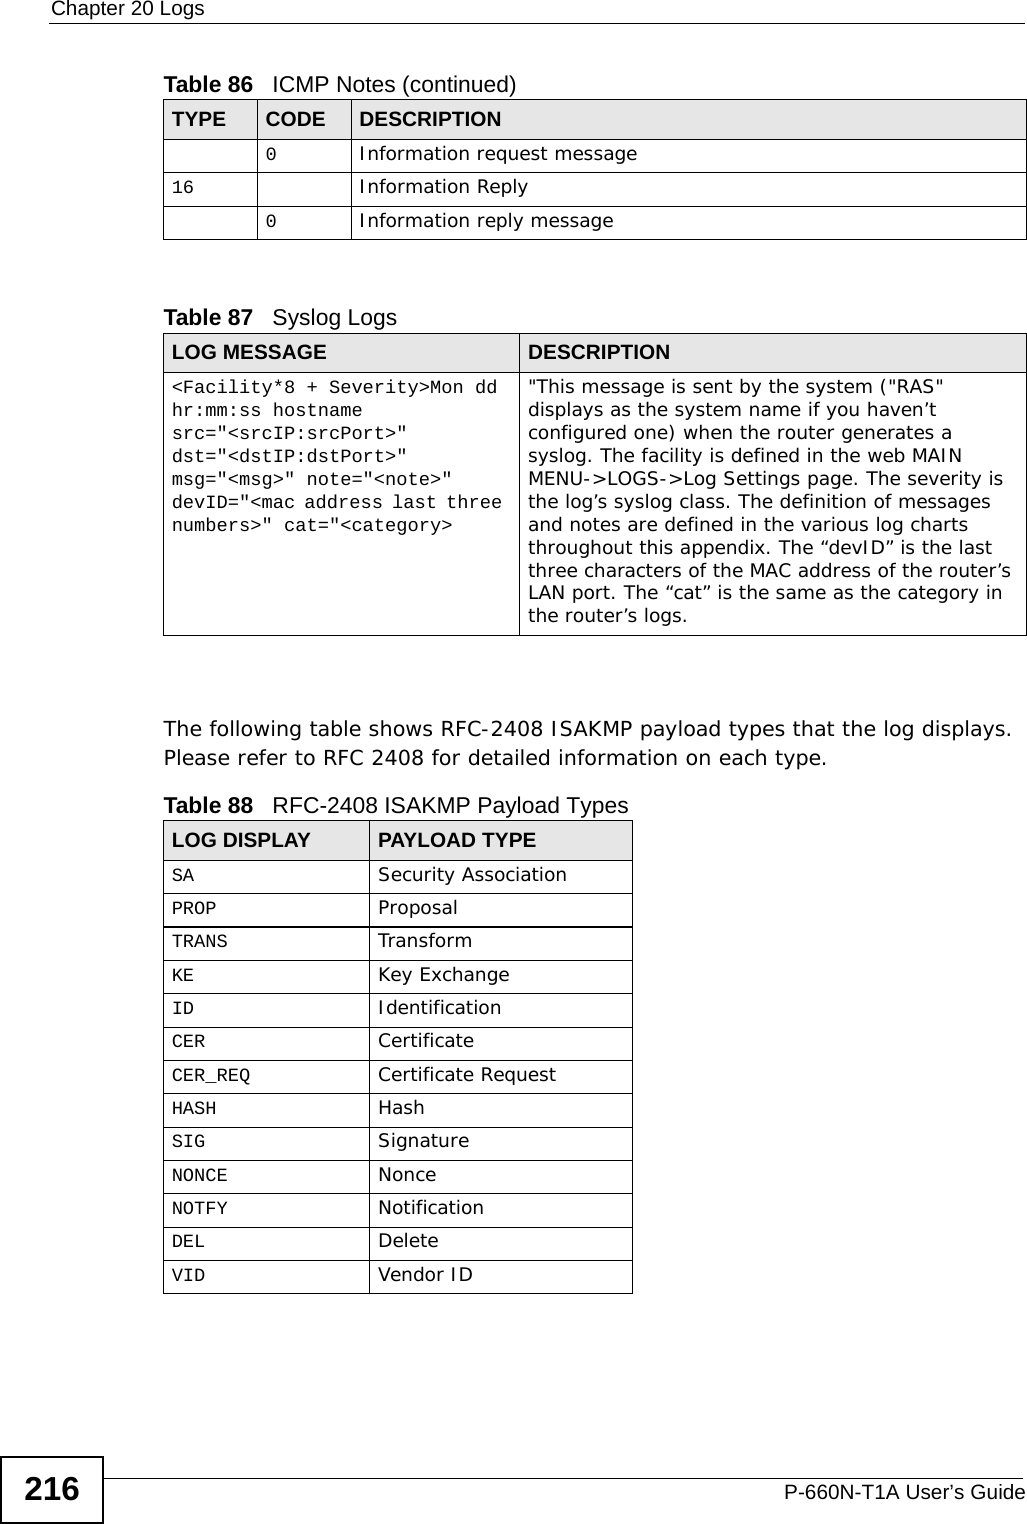 Chapter 20 LogsP-660N-T1A User’s Guide216 The following table shows RFC-2408 ISAKMP payload types that the log displays. Please refer to RFC 2408 for detailed information on each type. 0Information request message16 Information Reply0Information reply messageTable 87   Syslog LogsLOG MESSAGE DESCRIPTION&lt;Facility*8 + Severity&gt;Mon dd hr:mm:ss hostname src=&quot;&lt;srcIP:srcPort&gt;&quot; dst=&quot;&lt;dstIP:dstPort&gt;&quot; msg=&quot;&lt;msg&gt;&quot; note=&quot;&lt;note&gt;&quot; devID=&quot;&lt;mac address last three numbers&gt;&quot; cat=&quot;&lt;category&gt;&quot;This message is sent by the system (&quot;RAS&quot; displays as the system name if you haven’t configured one) when the router generates a syslog. The facility is defined in the web MAIN MENU-&gt;LOGS-&gt;Log Settings page. The severity is the log’s syslog class. The definition of messages and notes are defined in the various log charts throughout this appendix. The “devID” is the last three characters of the MAC address of the router’s LAN port. The “cat” is the same as the category in the router’s logs.Table 88   RFC-2408 ISAKMP Payload TypesLOG DISPLAY PAYLOAD TYPESA Security AssociationPROP ProposalTRANS TransformKE Key ExchangeID IdentificationCER CertificateCER_REQ Certificate RequestHASH HashSIG SignatureNONCE NonceNOTFY NotificationDEL DeleteVID Vendor IDTable 86   ICMP Notes (continued)TYPE CODE DESCRIPTION